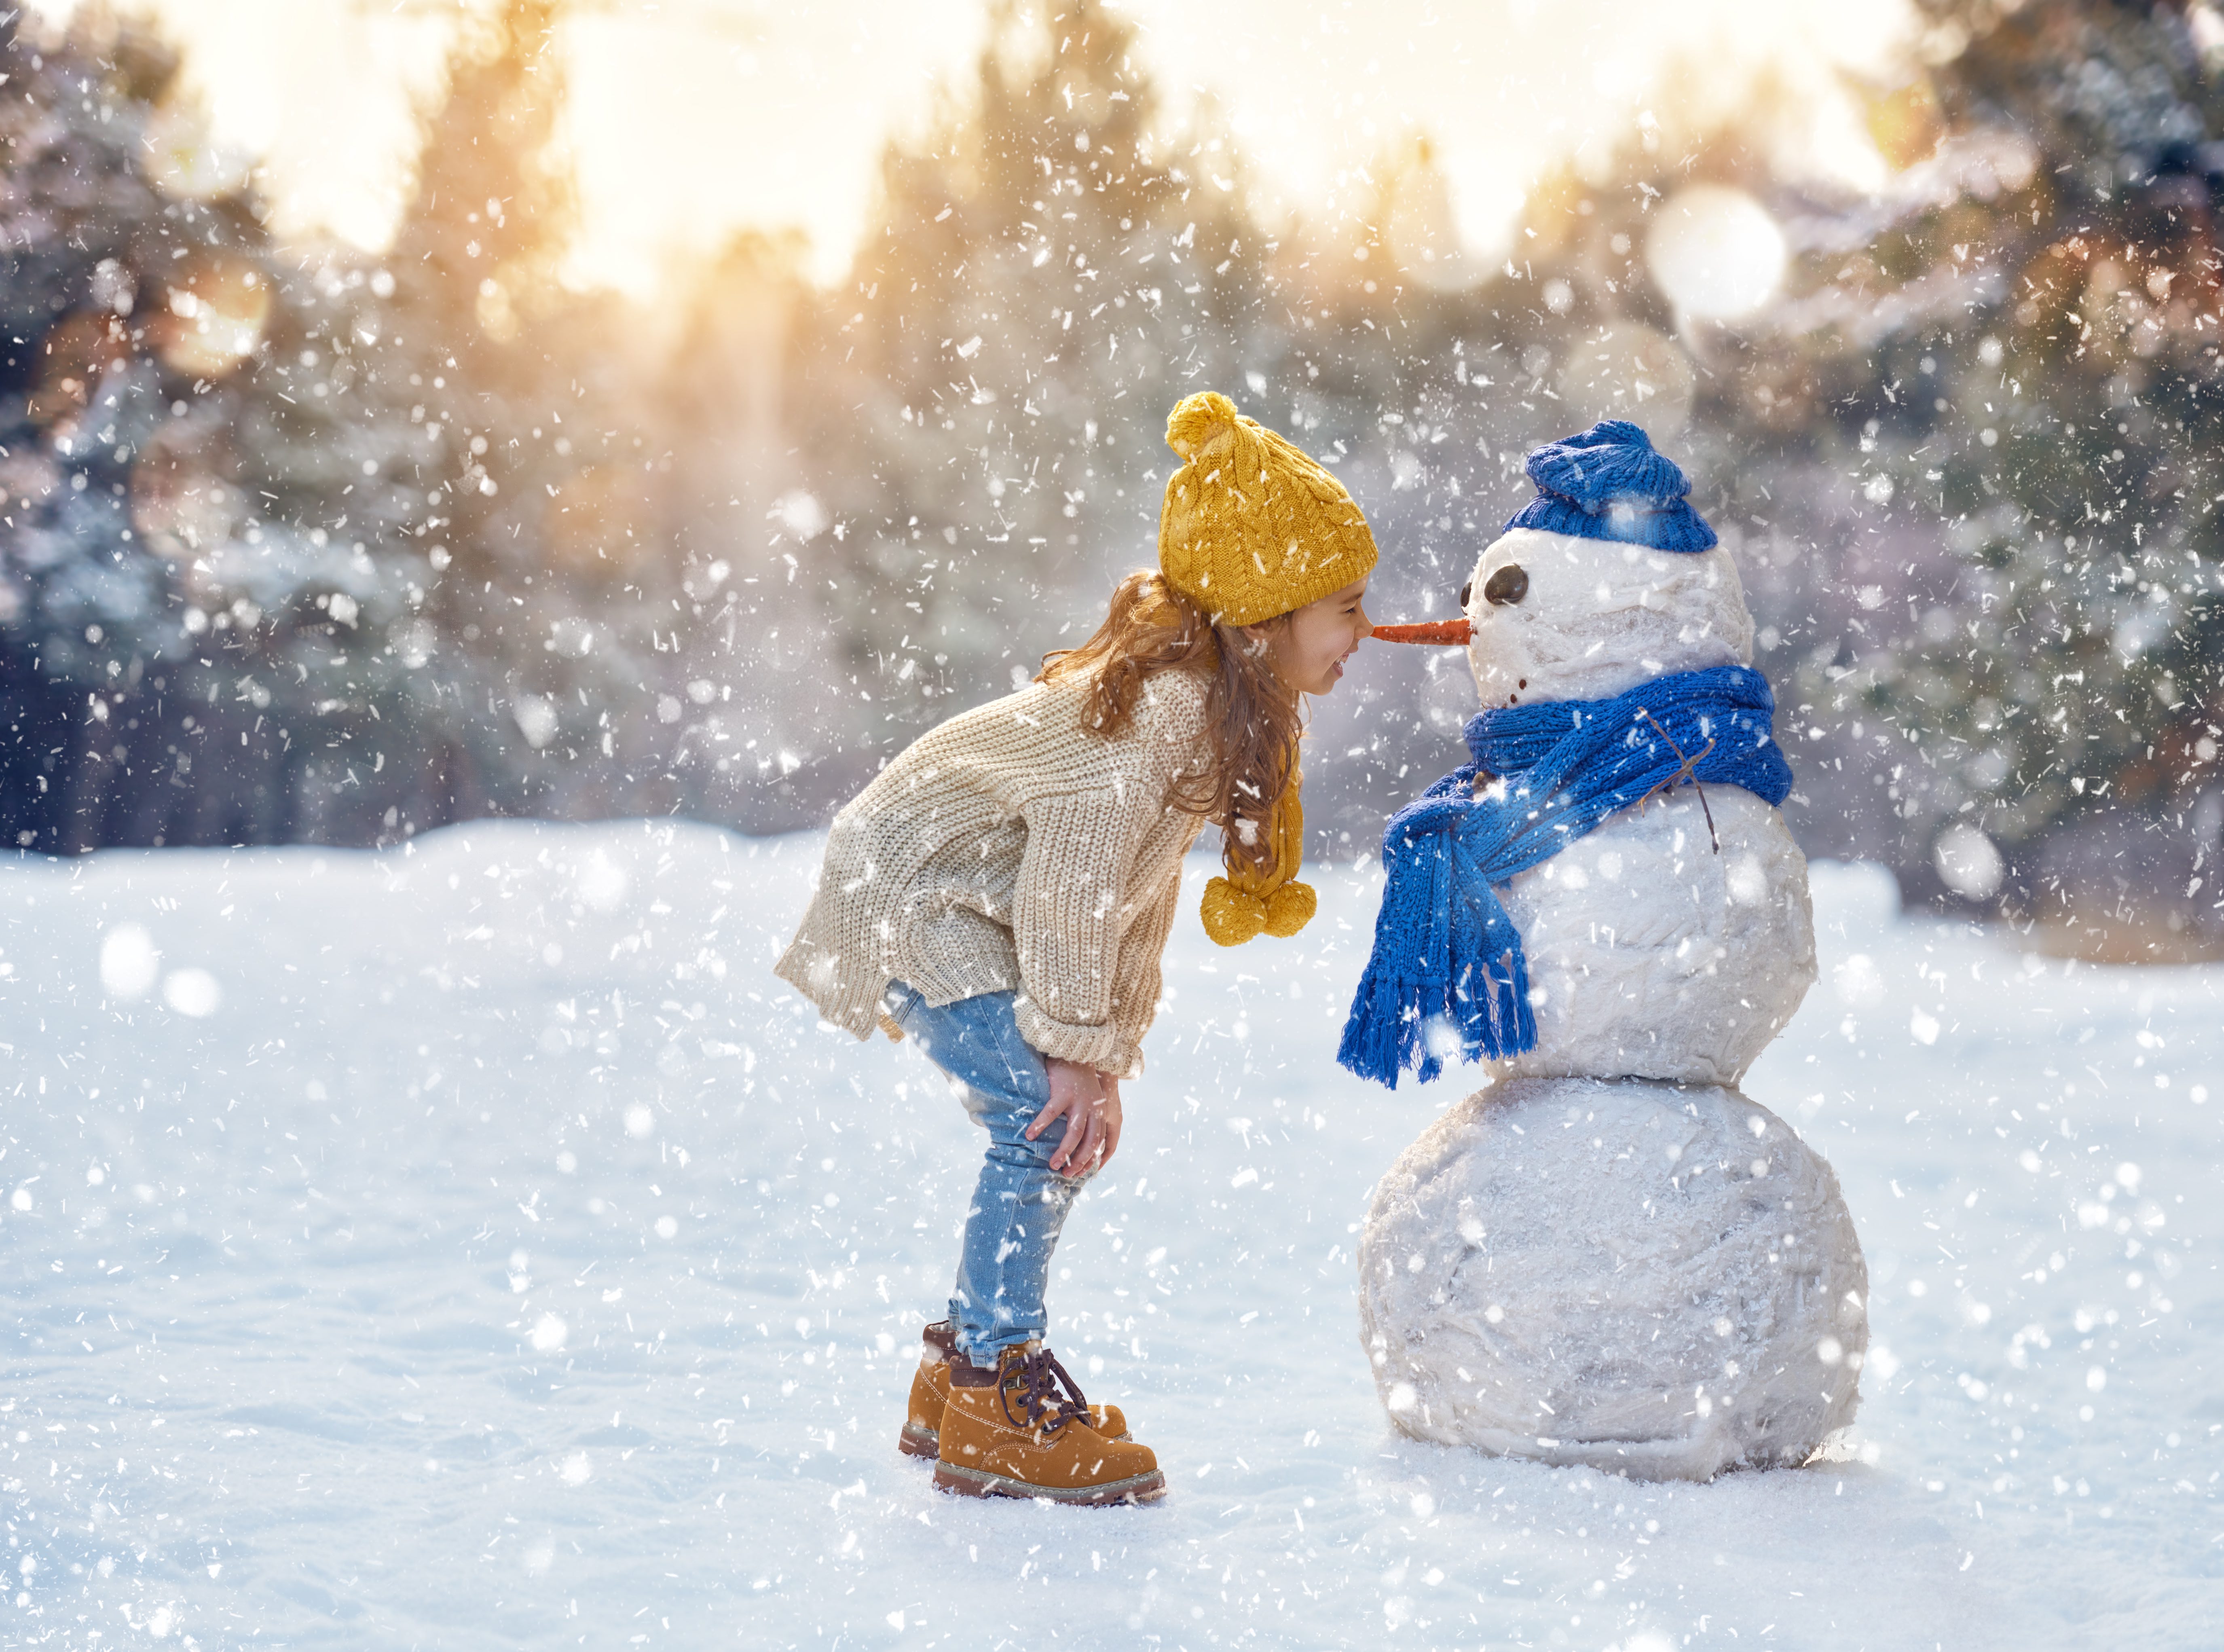 Little girl smiling with the snowman she built 